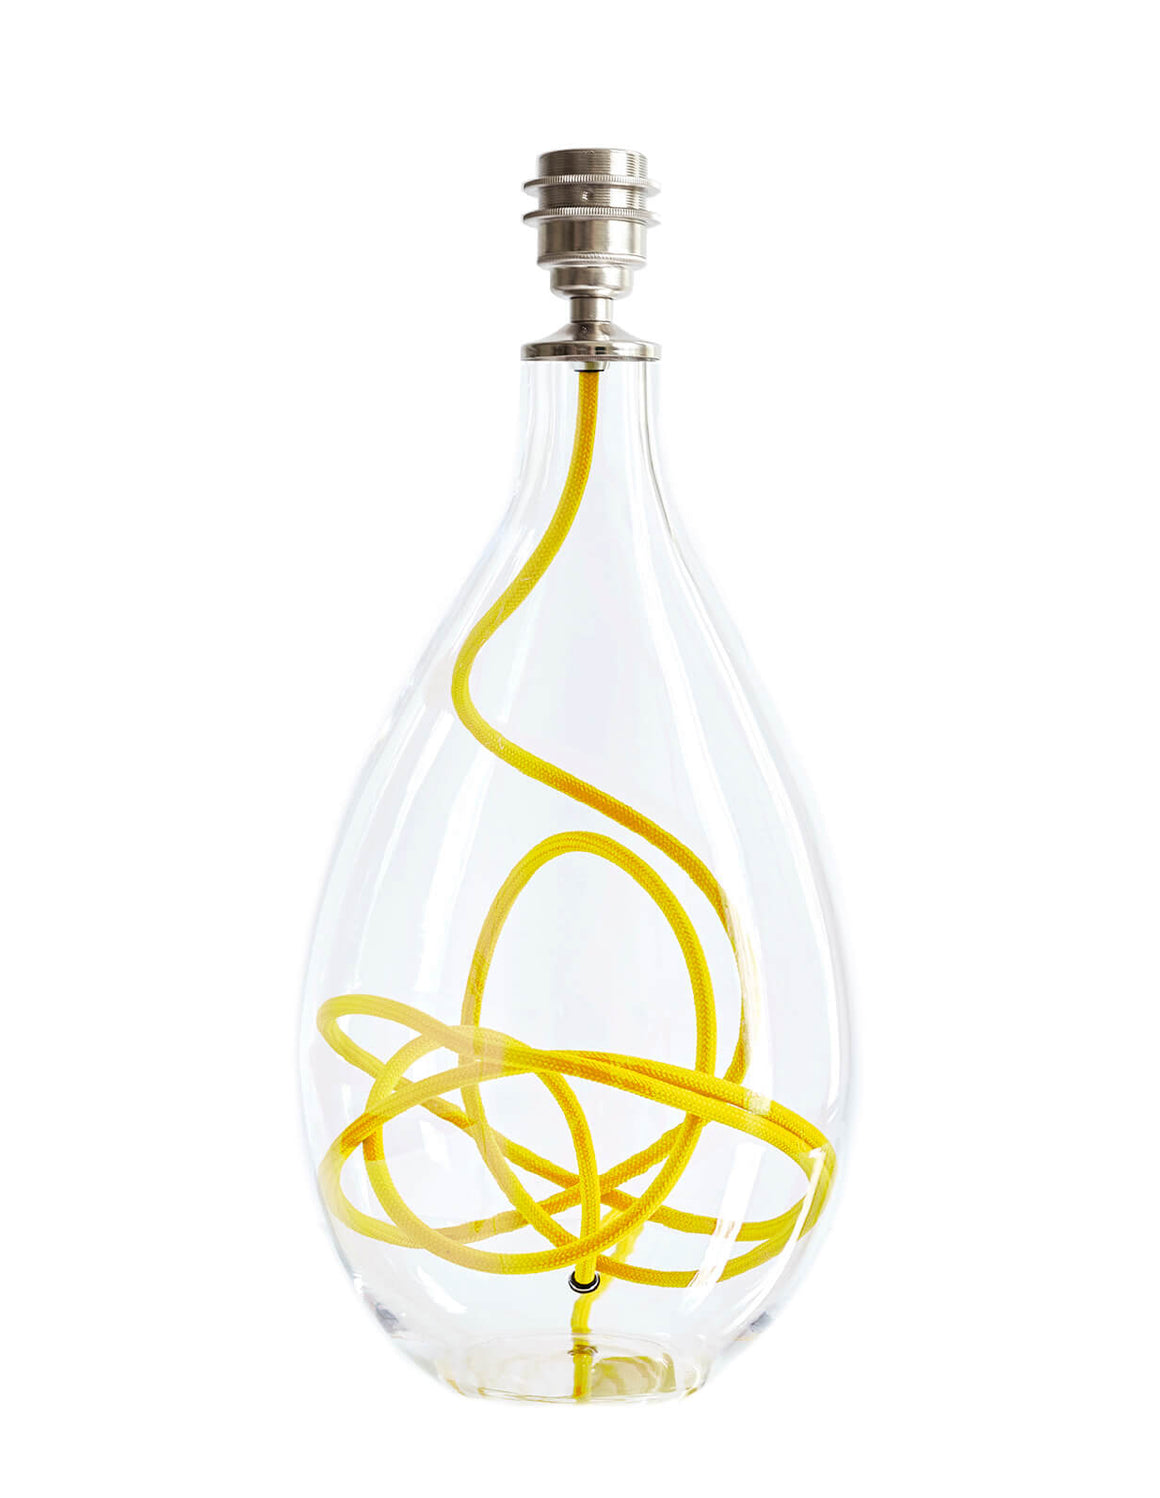 Glass lamp base with yellow flex, designed by Anna Jacobs